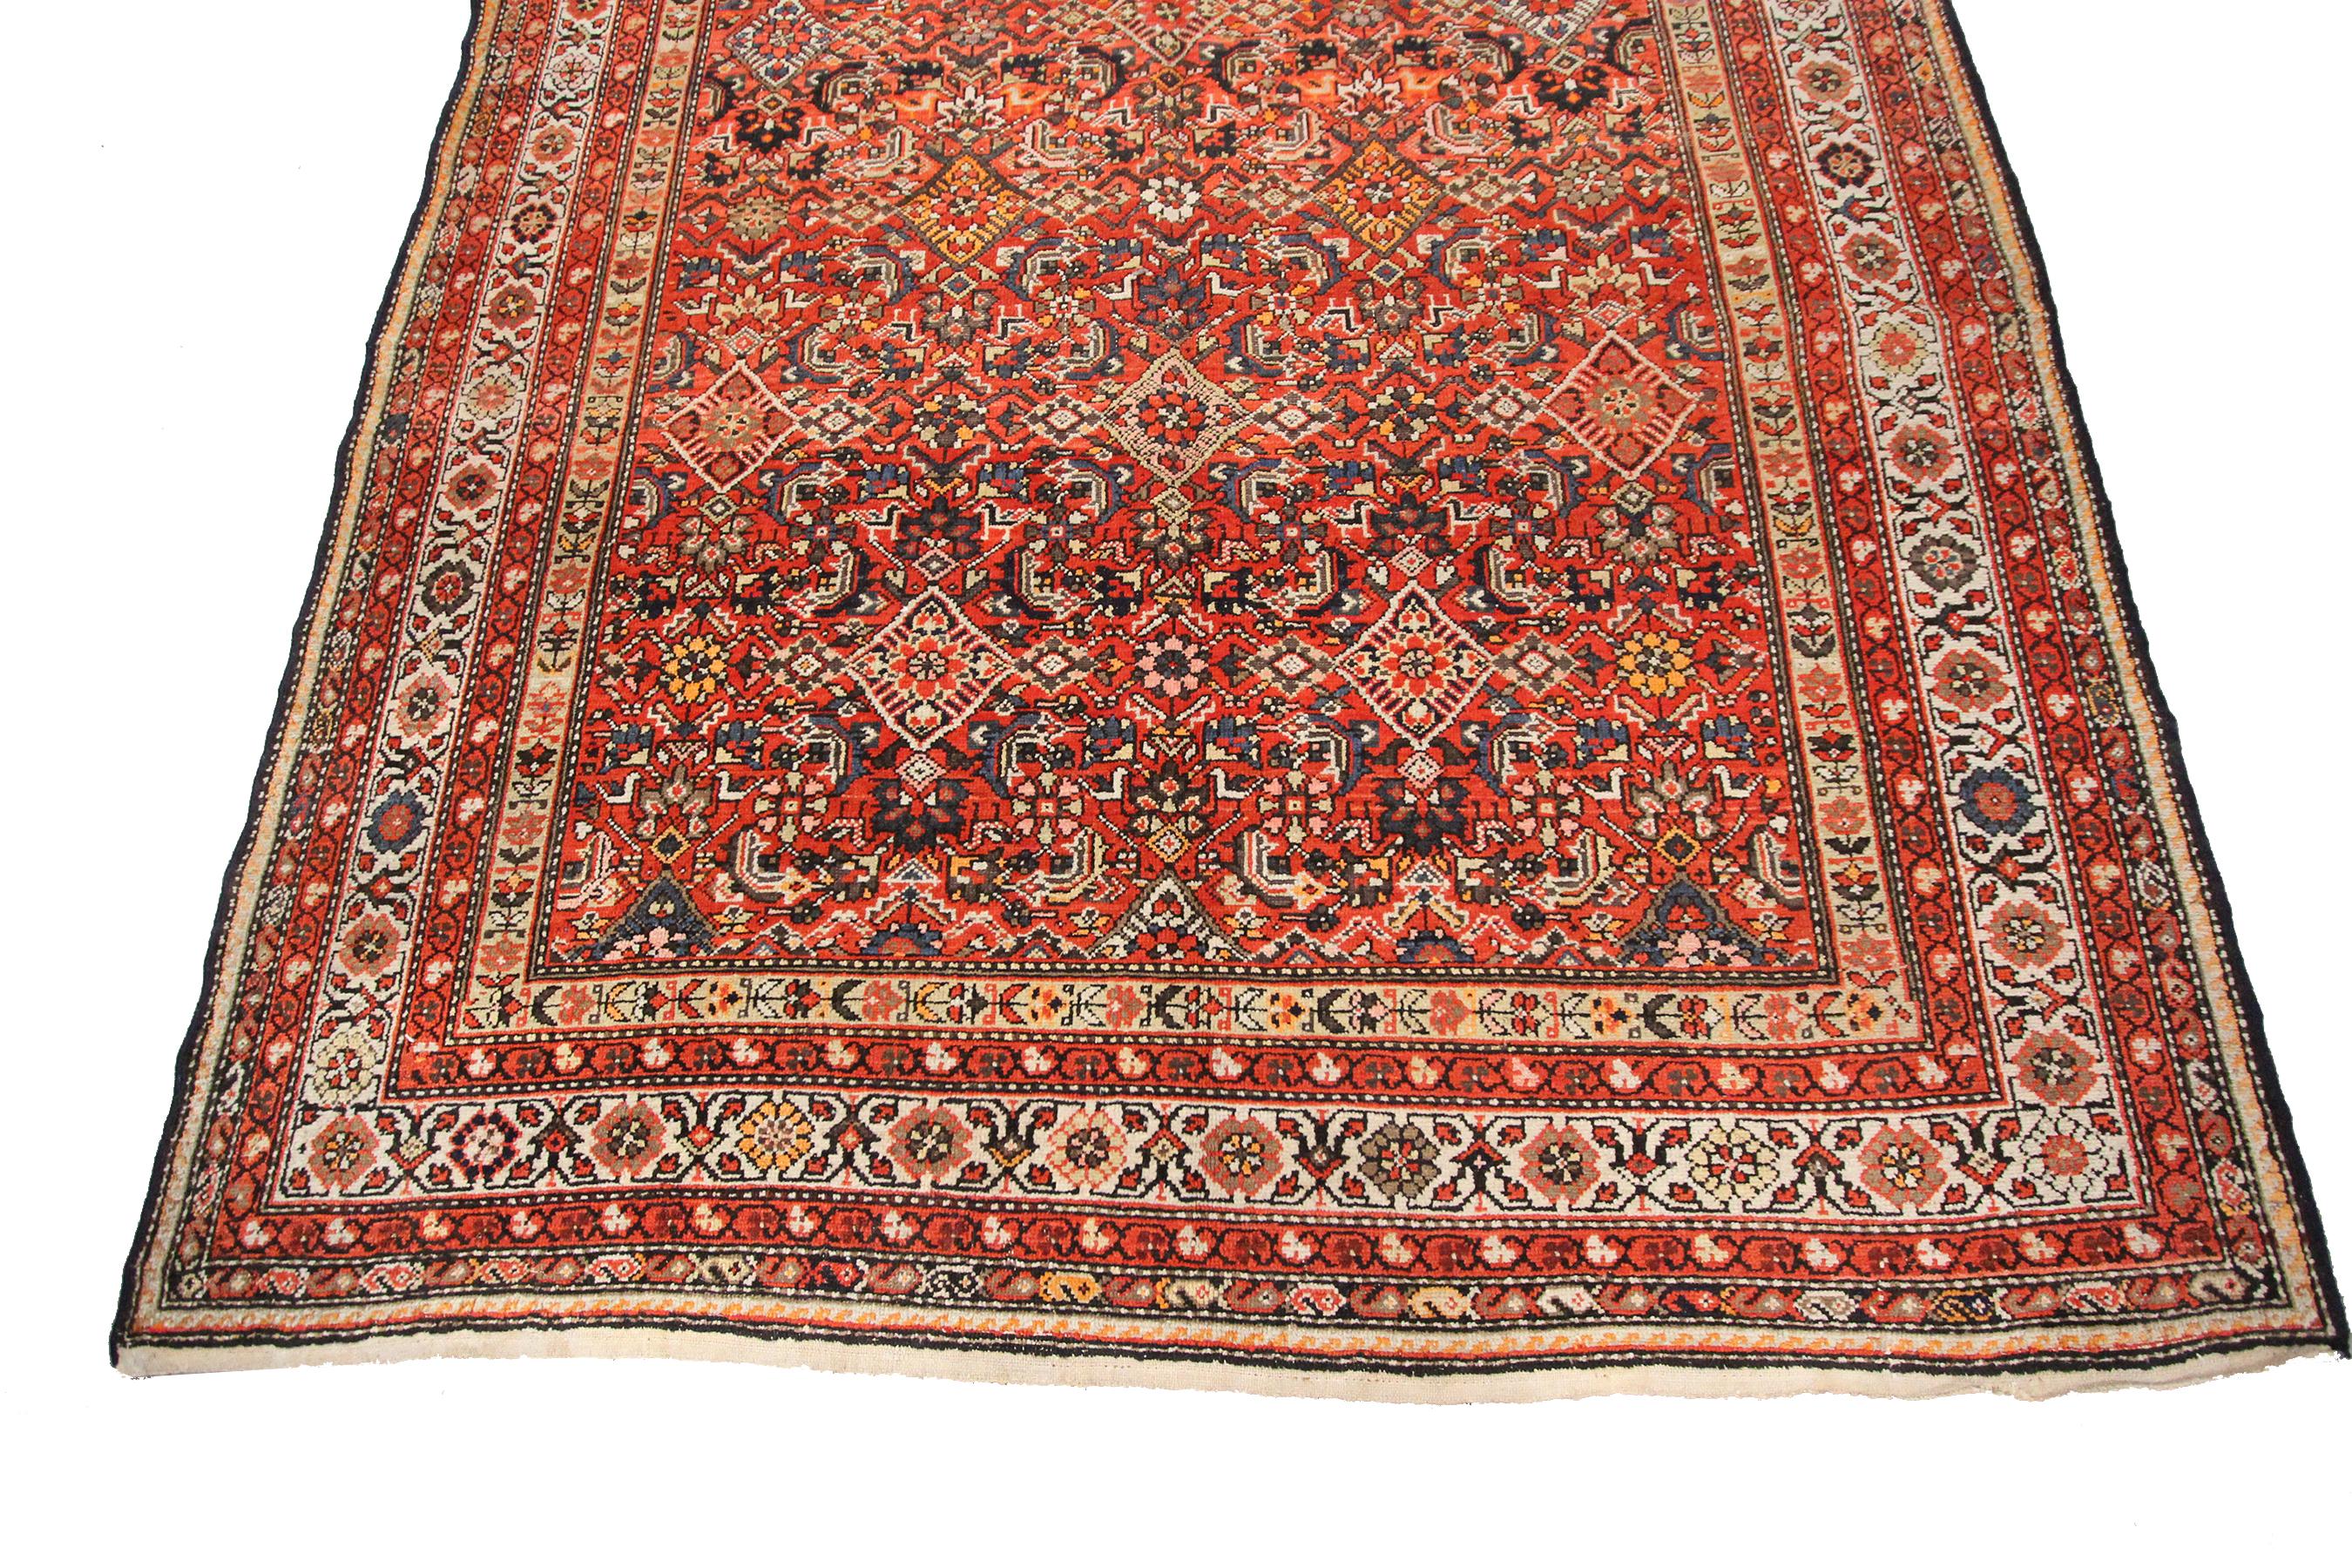 Late 19th Century Large Antique Persian Farahan Rug Antique Farahan Persian Rug Overall 6x14 For Sale